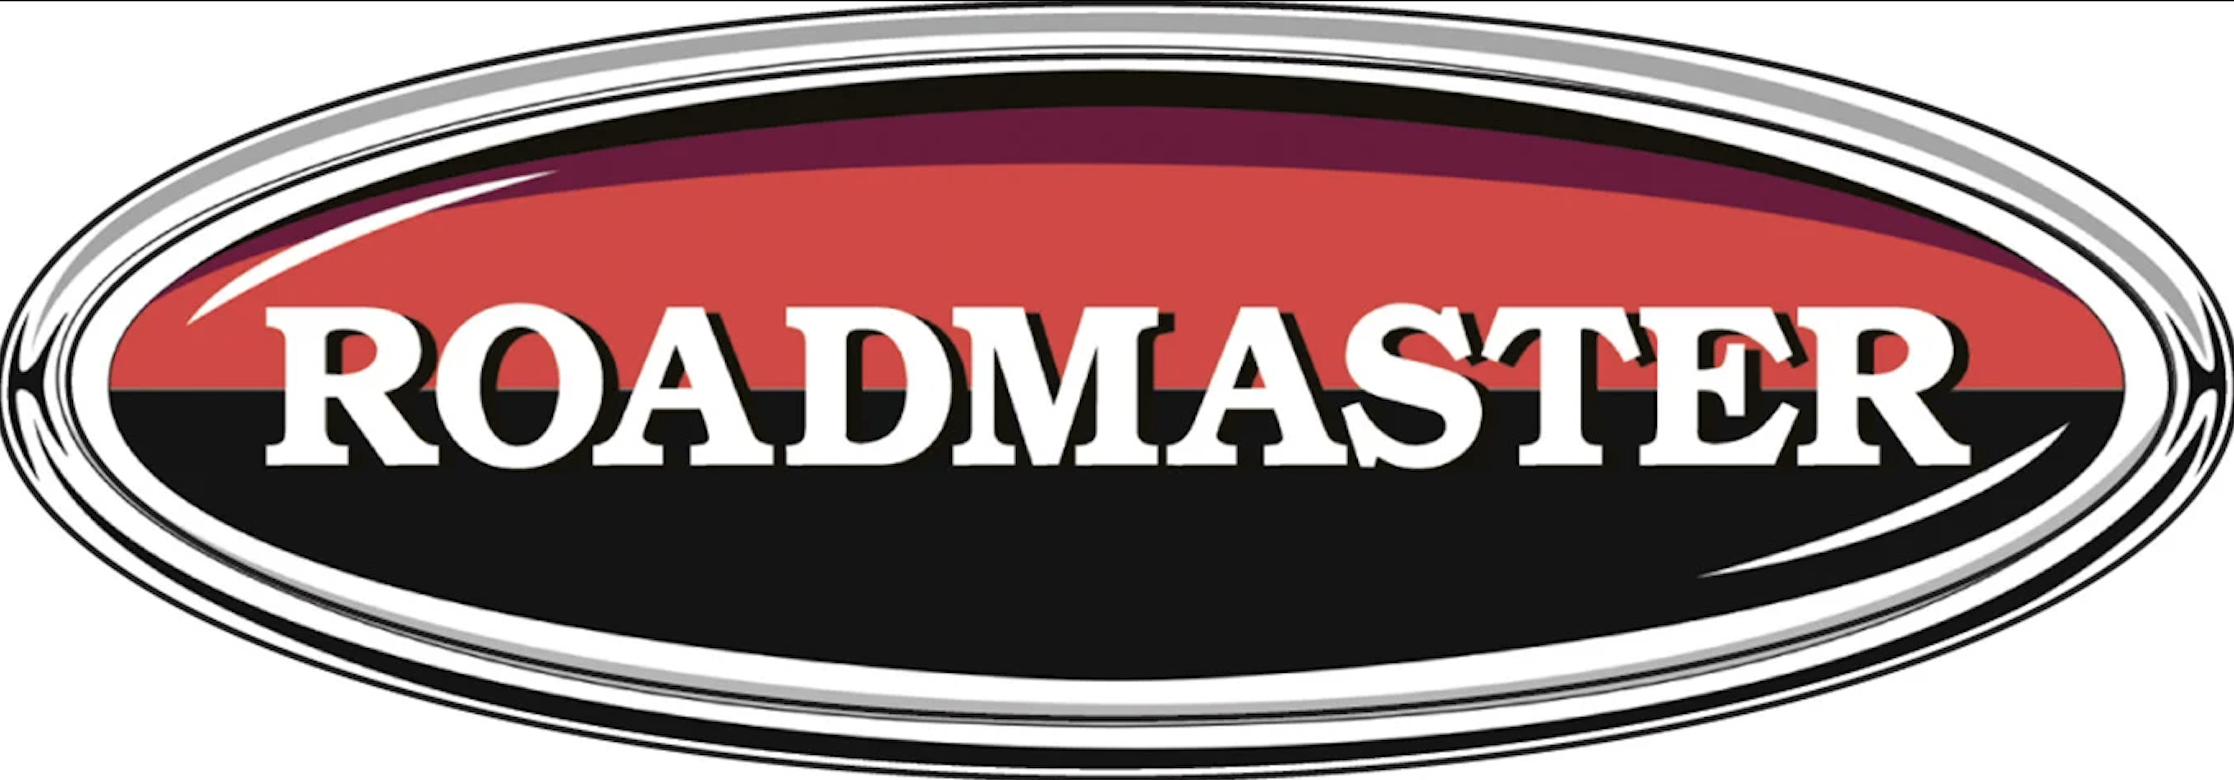 Roadmaster Products Mooresville NC.png